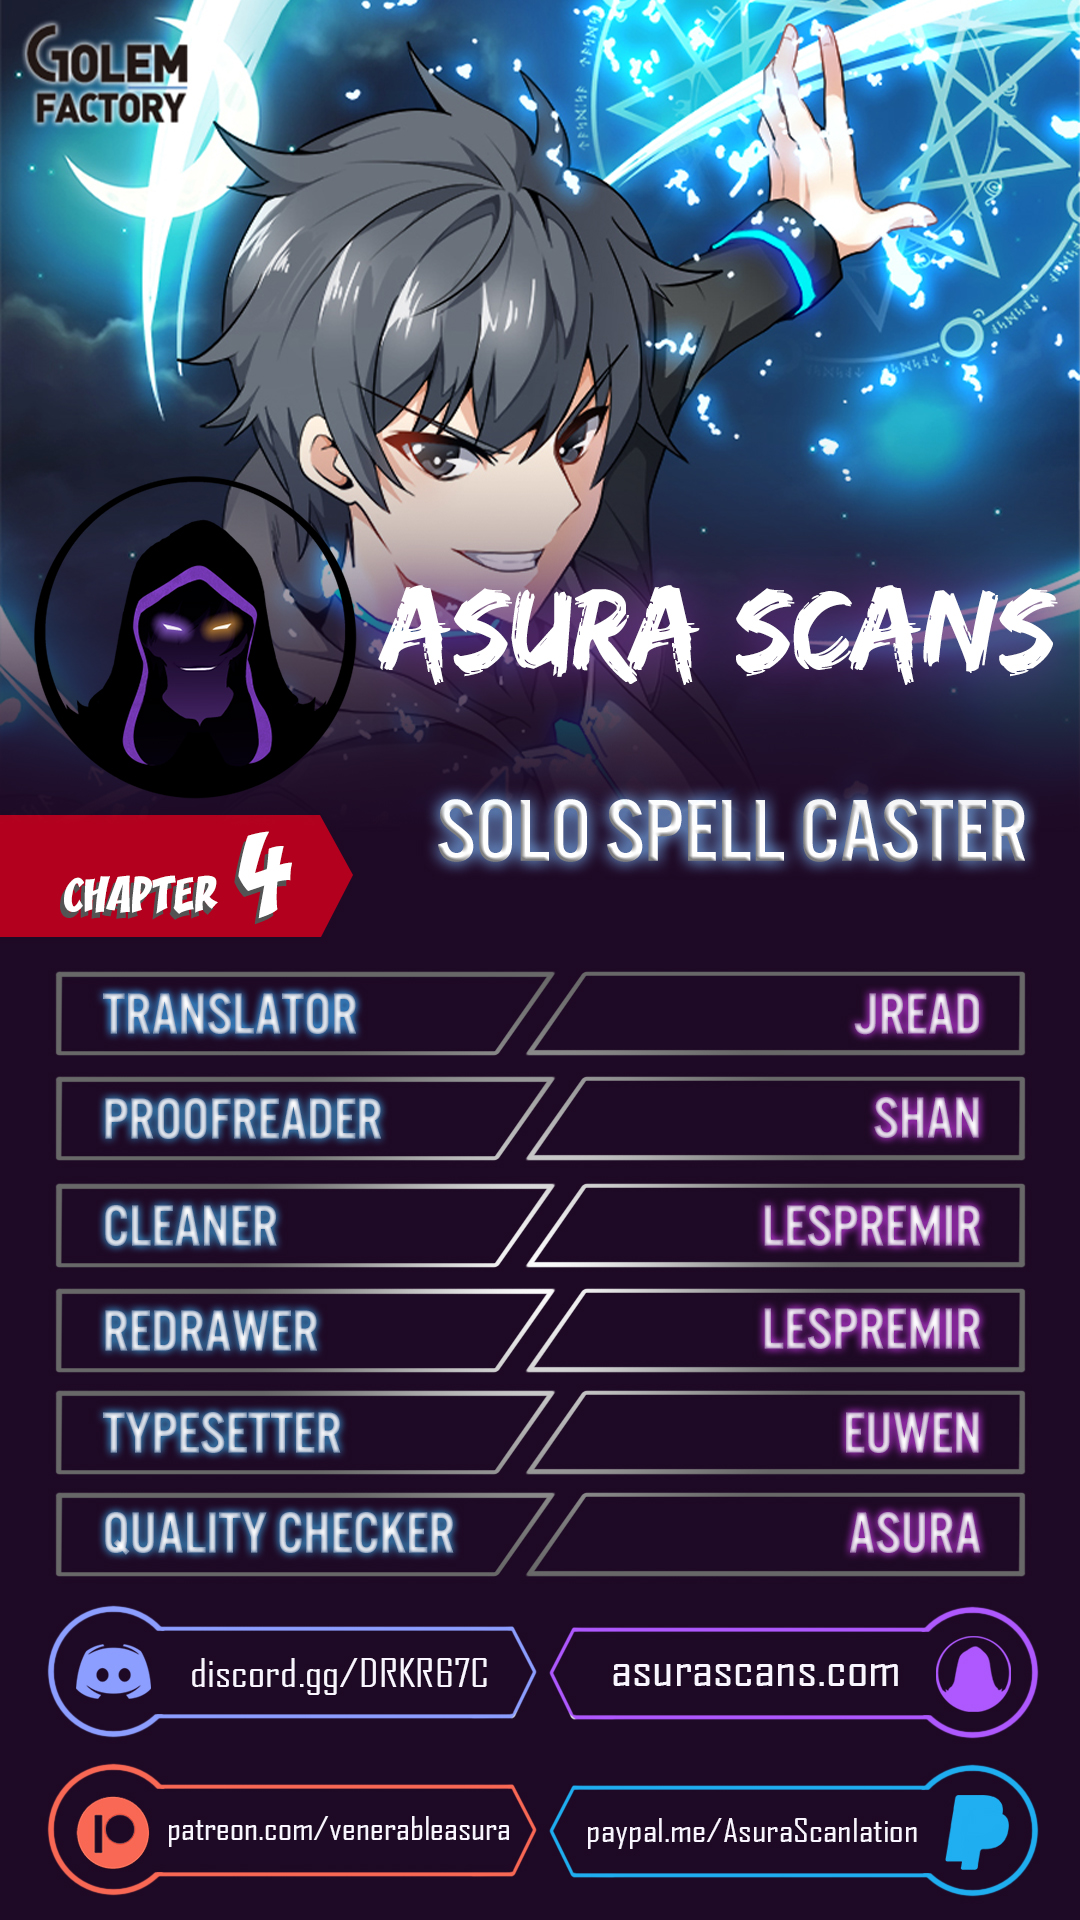 Solo Spell Caster Ch. 4